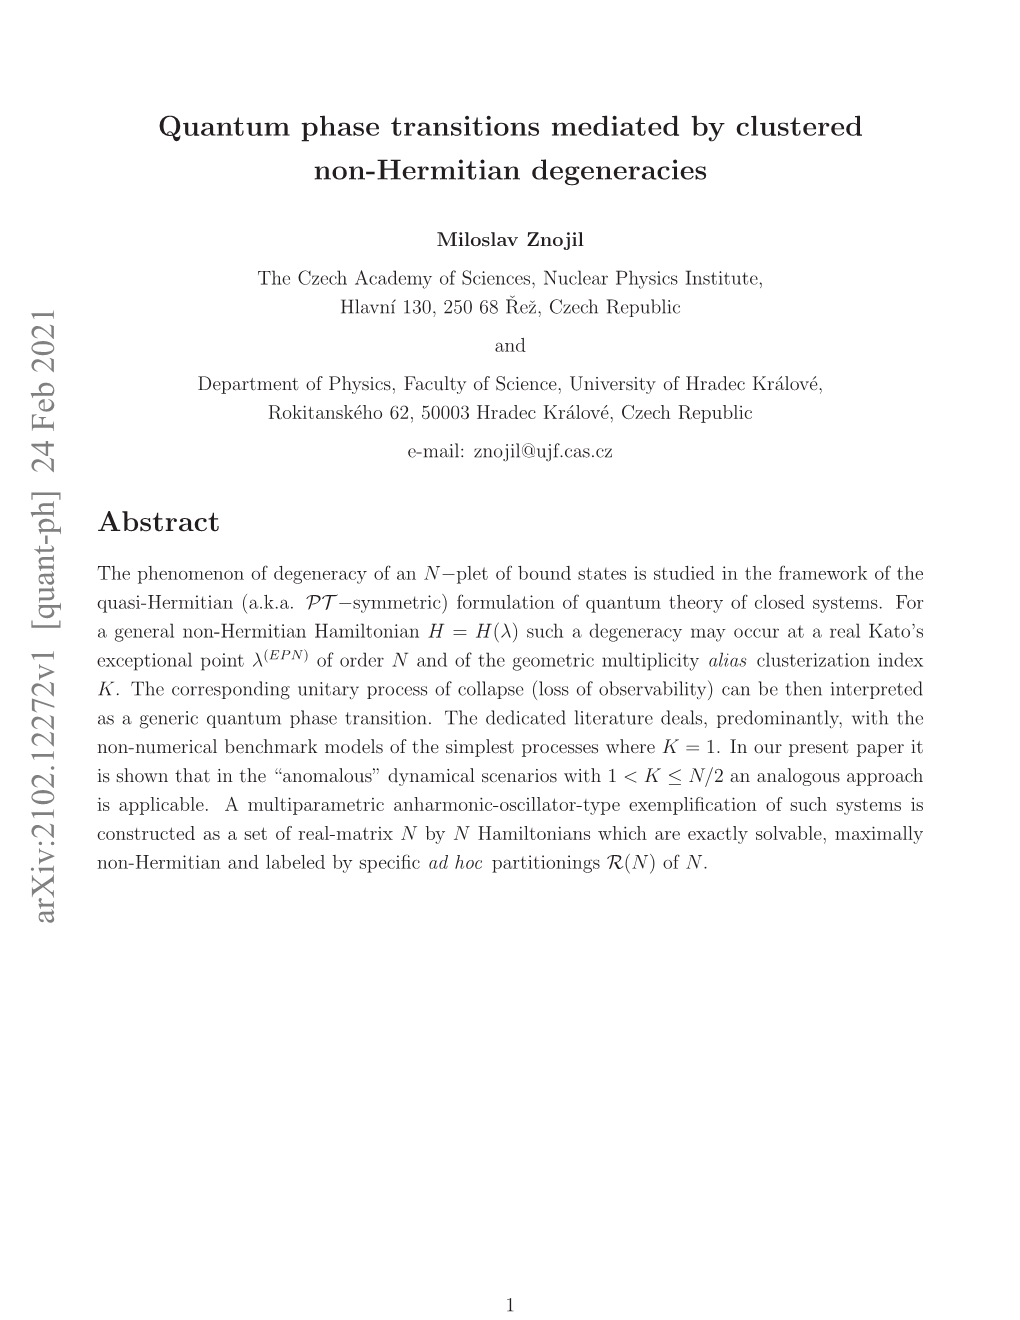 Quantum Phase Transitions Mediated by Clustered Non-Hermitian